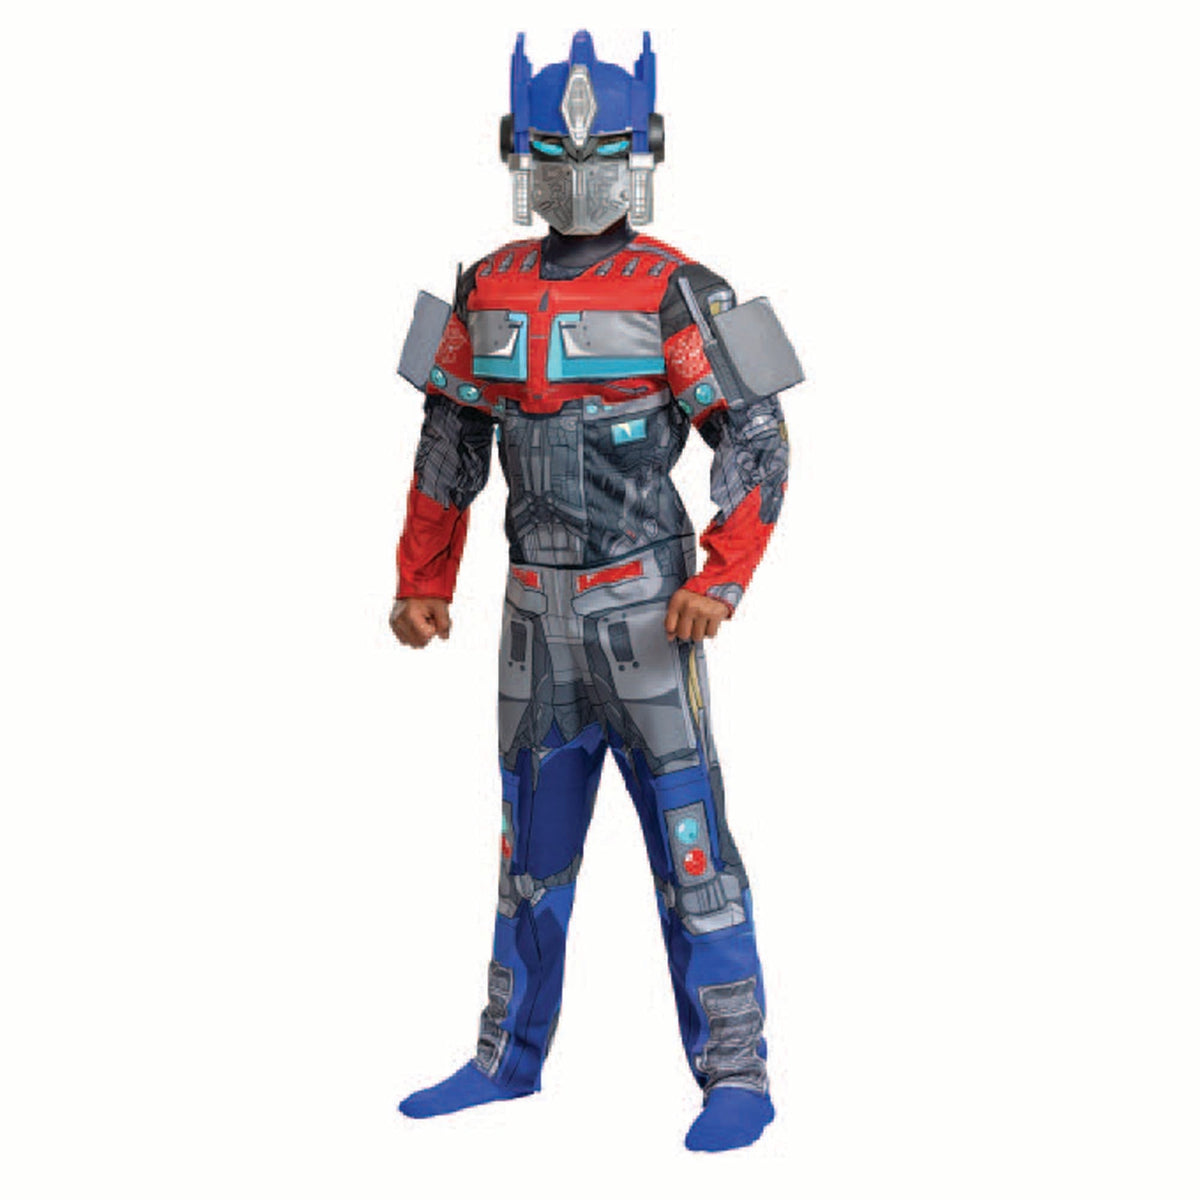 DISGUISE (TOY-SPORT) Costumes Transformers Optimus Prime Muscle Jumpsuit Costume for Kids, Red and Blue Muscle Jumpsuit